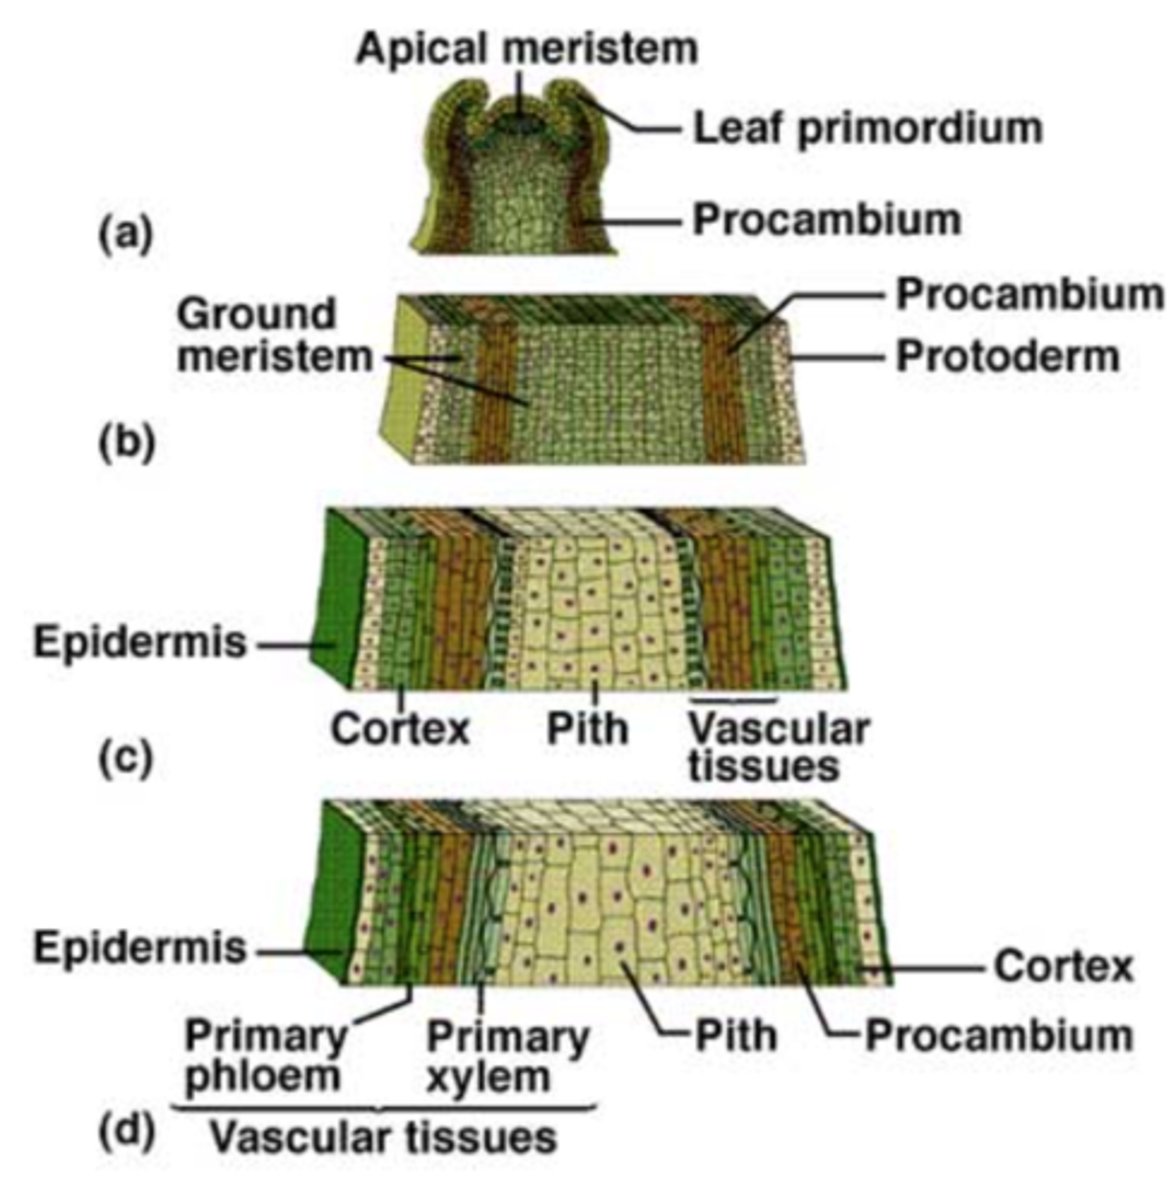 <p>- Product of the apical meristem</p><p>- Tissues include dermal, ground (cortical) and vascular</p>